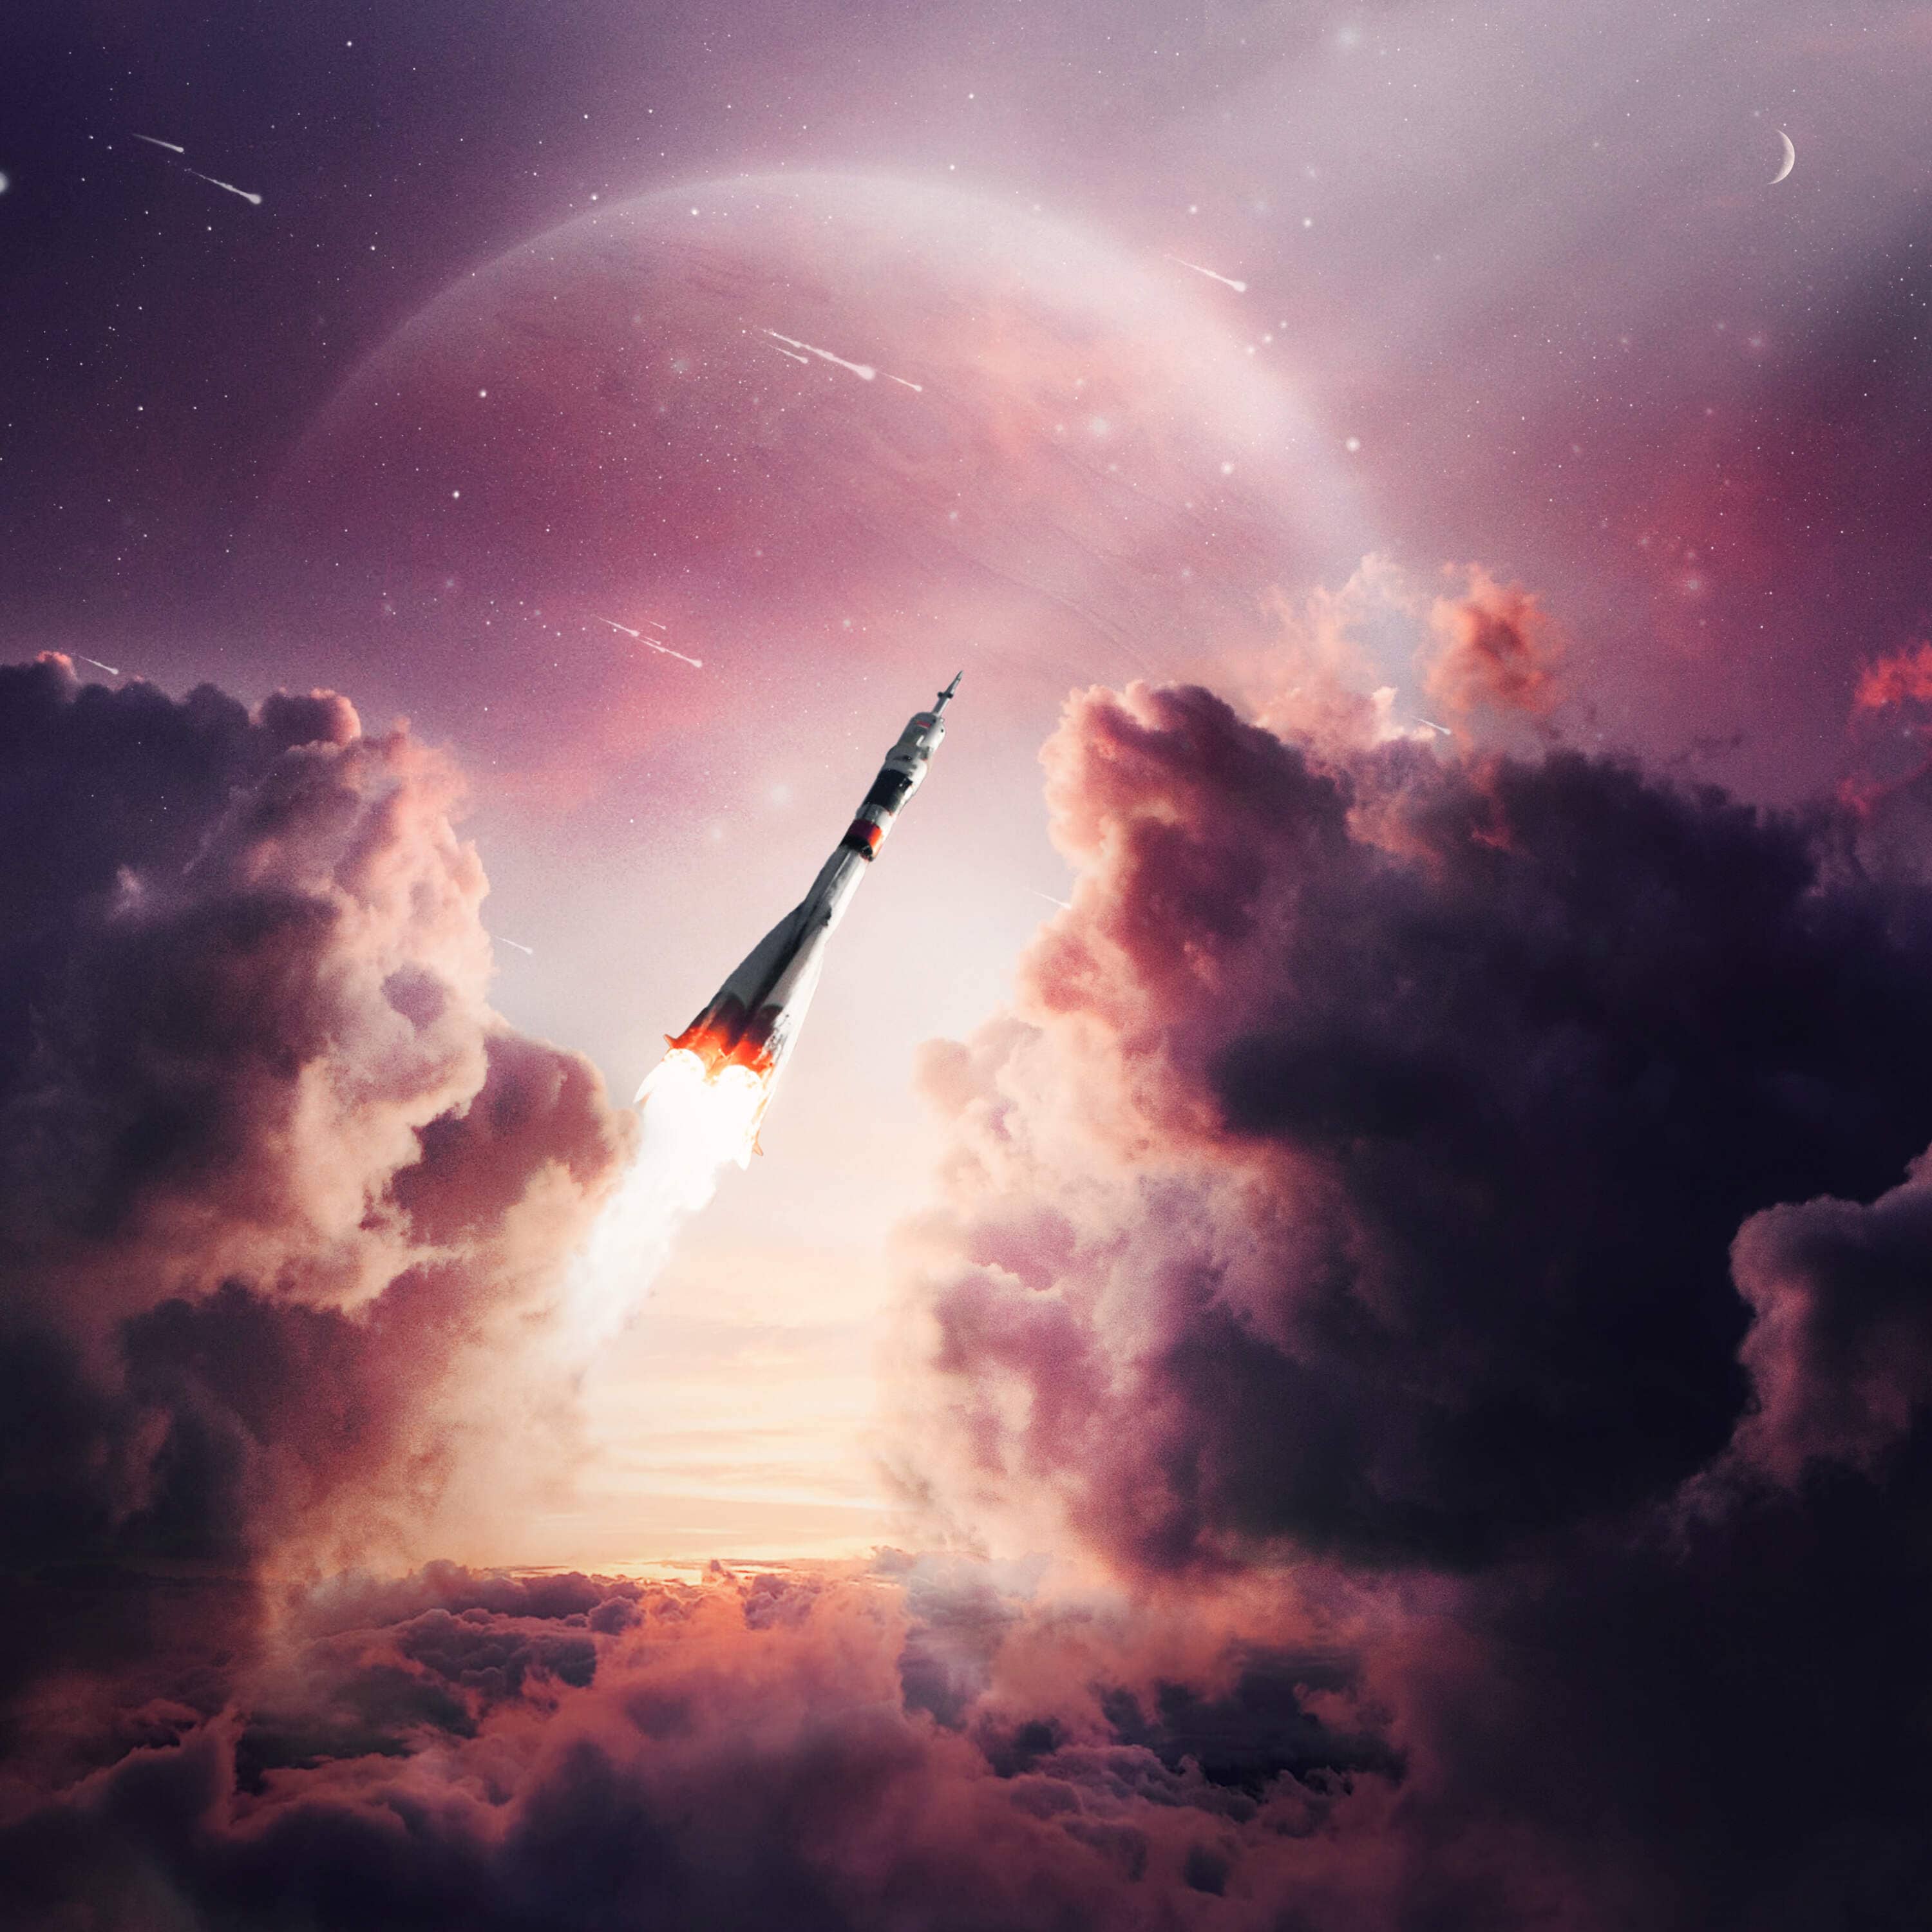 Create this "Reaching Space Through the Clouds" Photo Manipulation with Photoshop